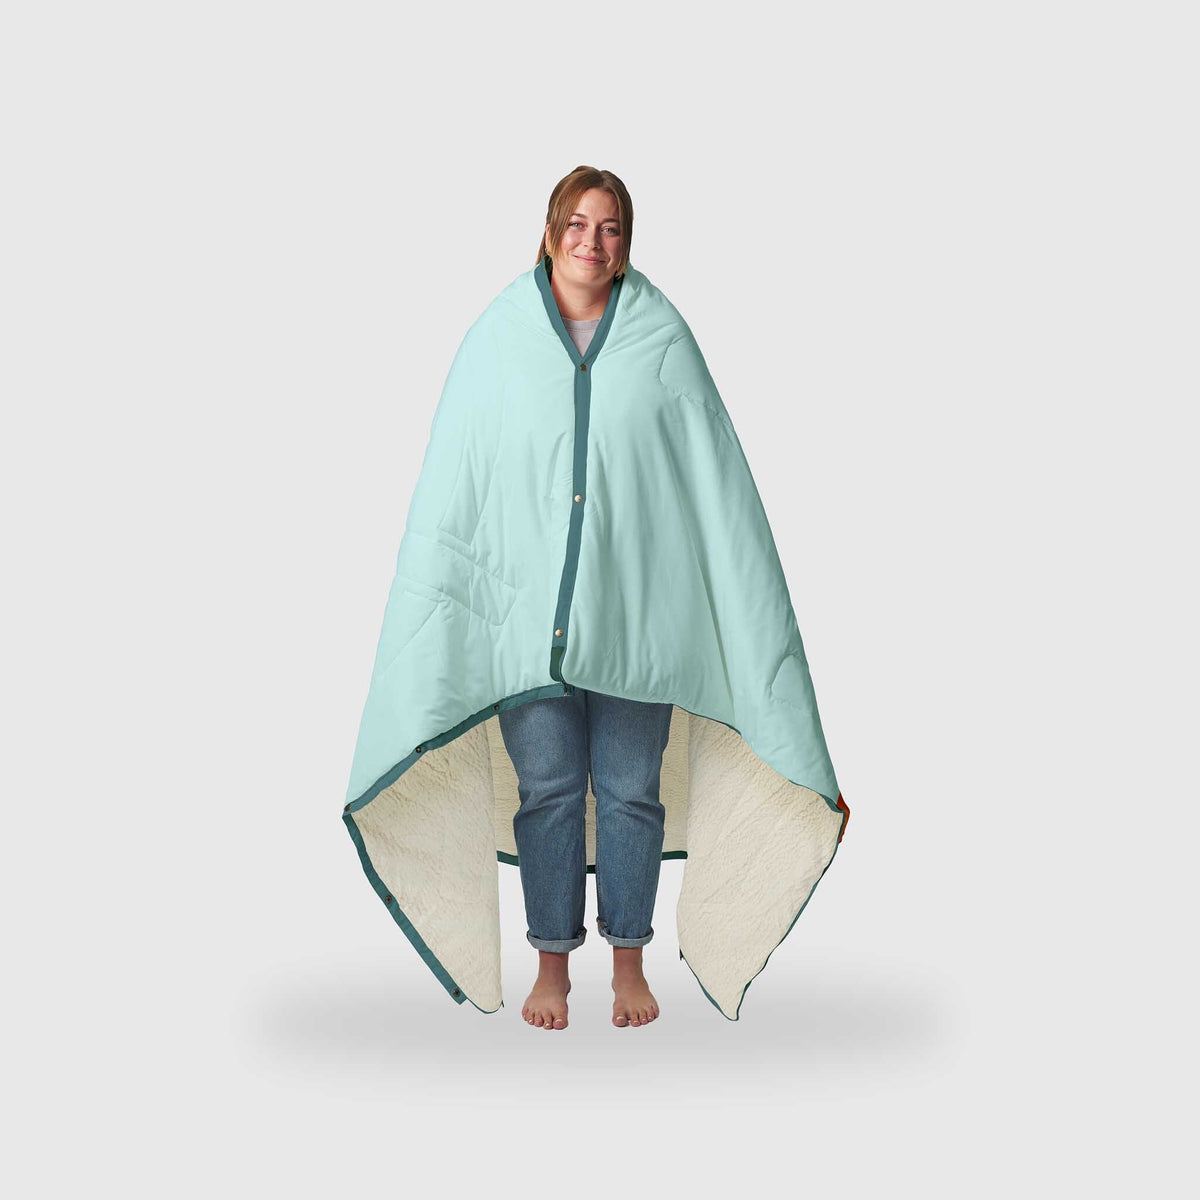 VOITED CloudTouch® Indoor/Outdoor Camping Blanket - Blue Mountain Blankets VOITED 